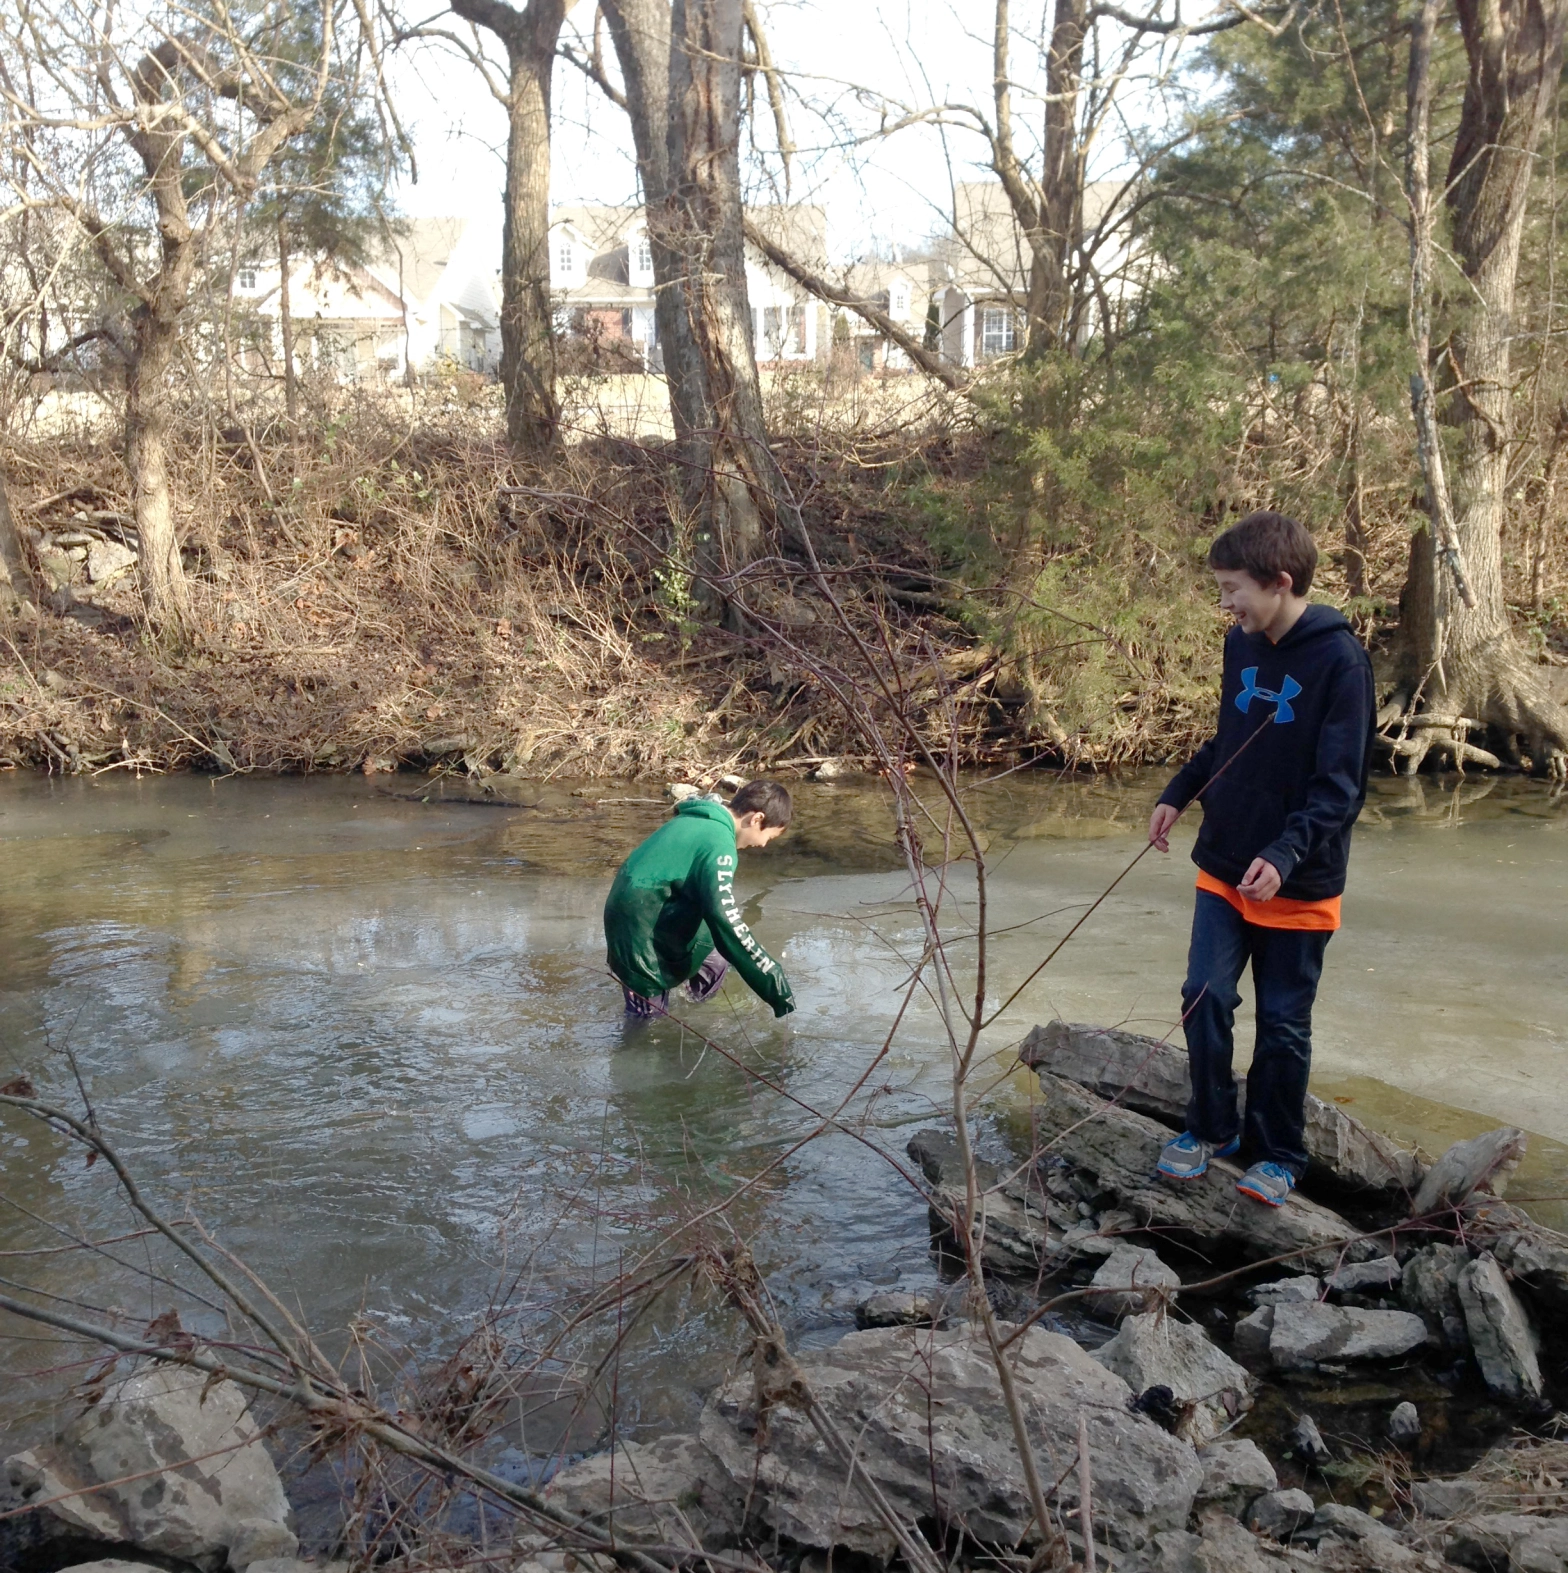 Kendrick (standing) and Keaton (in water) at the creek that runs by our neighborhood. Every time we went, Keaton “accidentally” fell in.